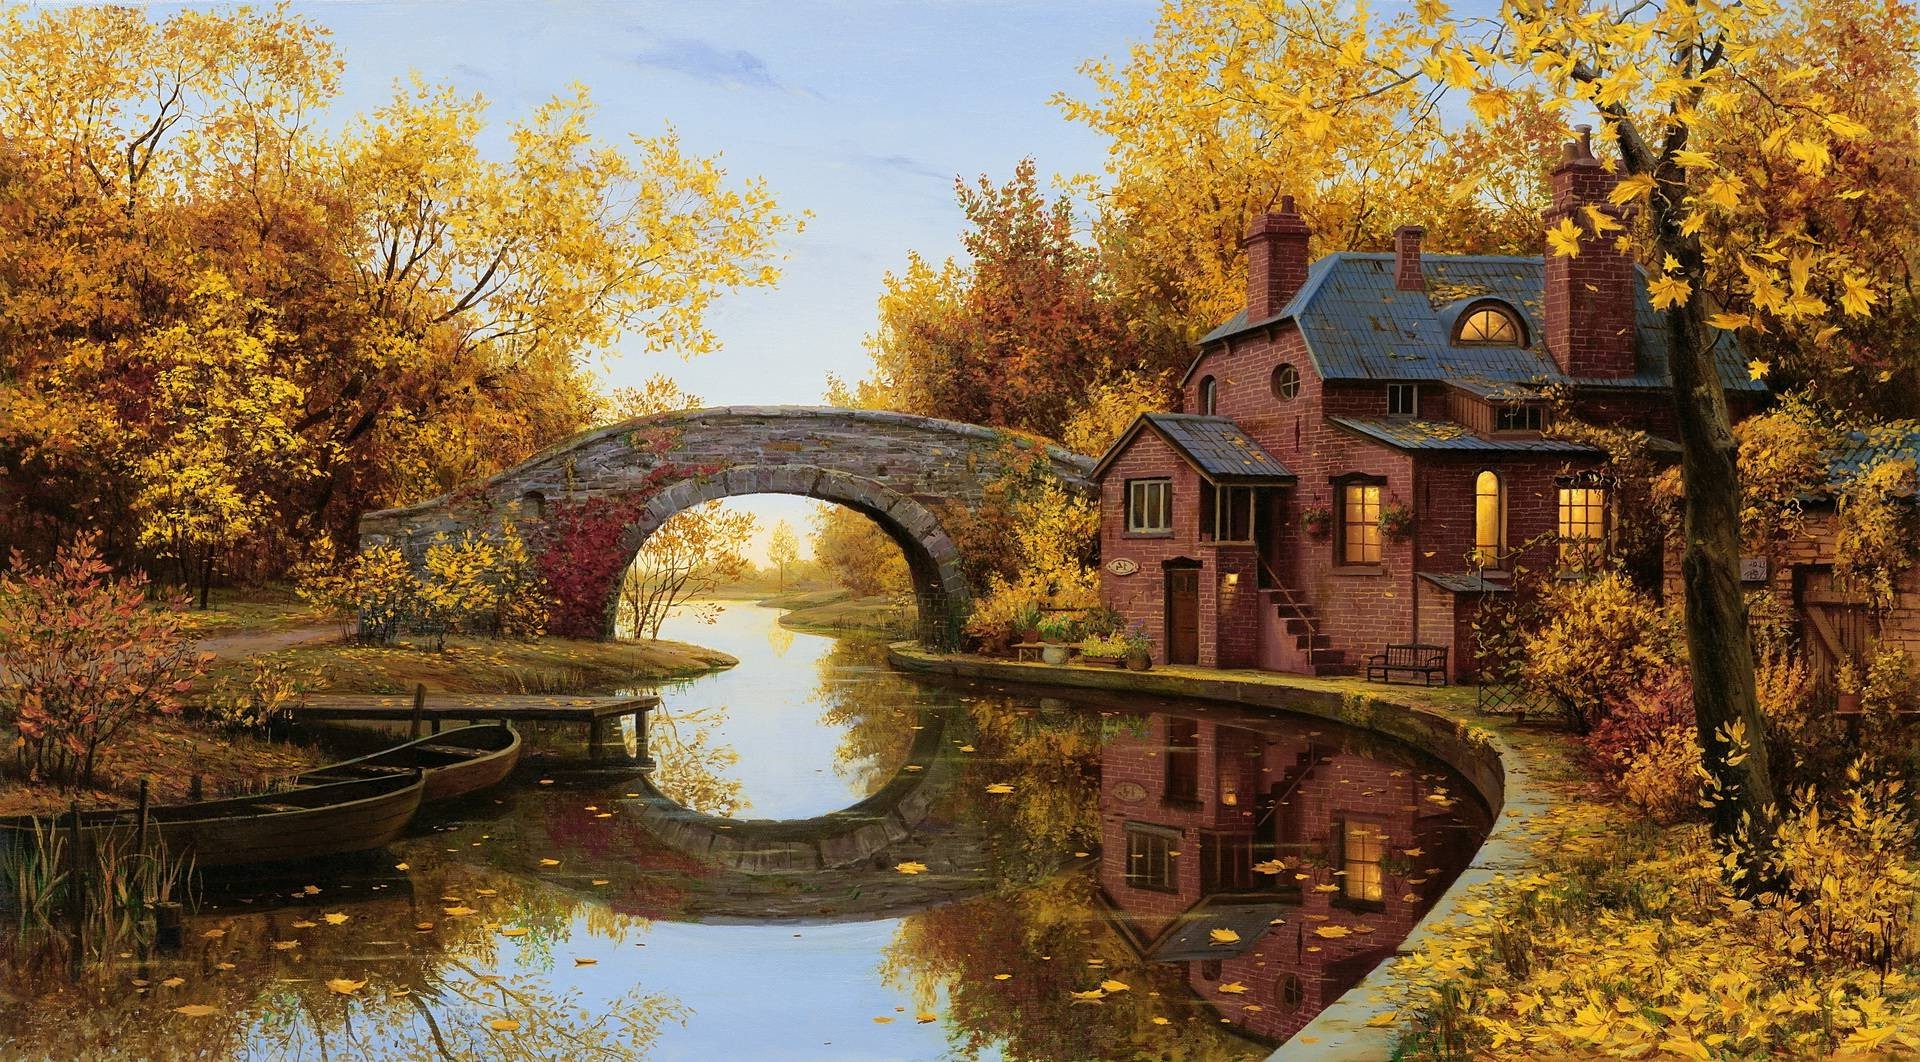 reflection, Bridge, Arch, River, House, Trees, Boat, Fall Wallpapers HD